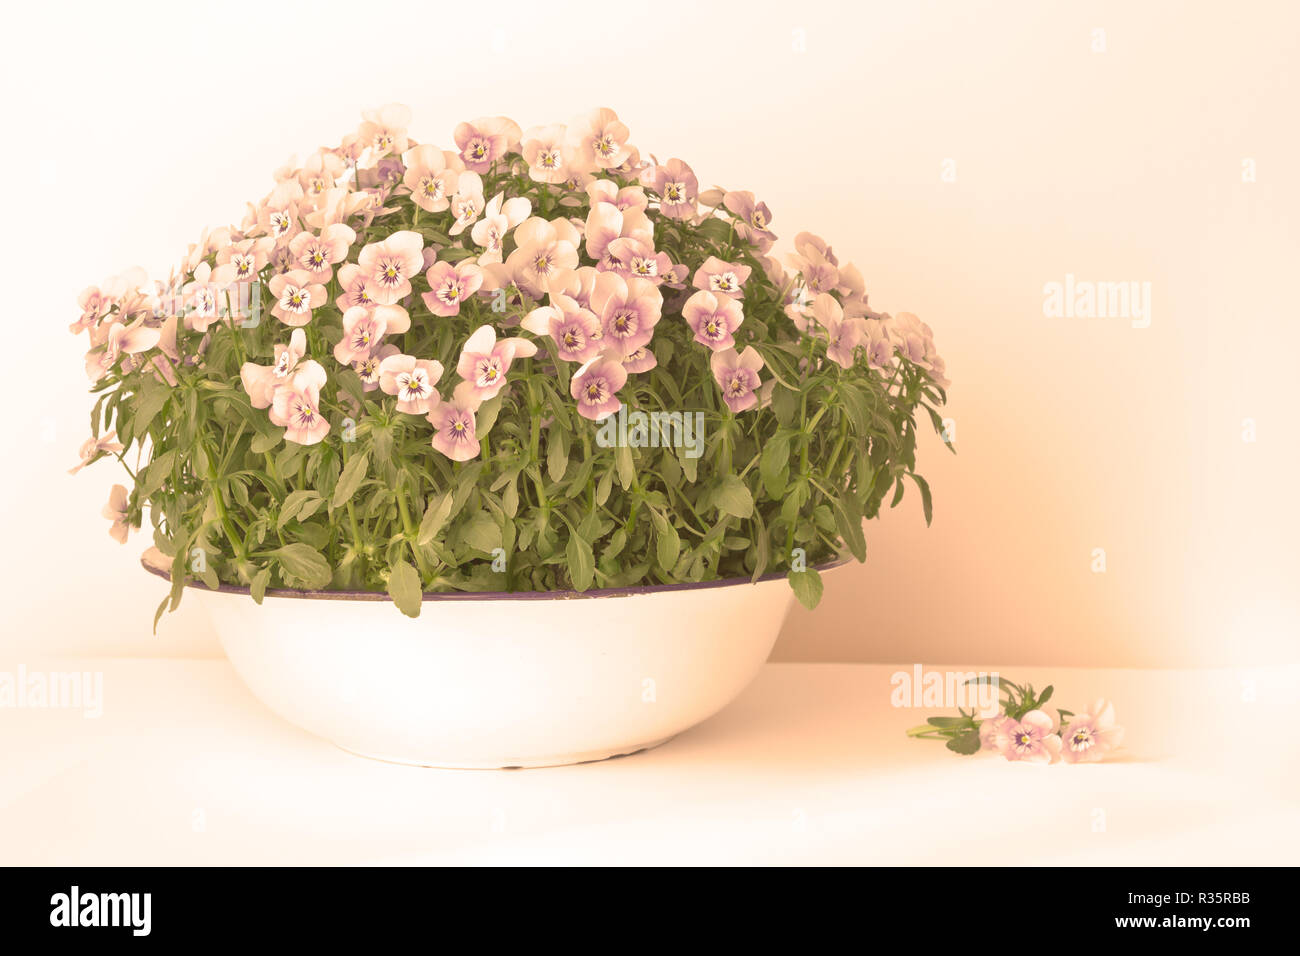 Pansy flowers in shades of lilac, violet and blue in a vintage wash basin or bowl on white background, vintage filter effect Stock Photo